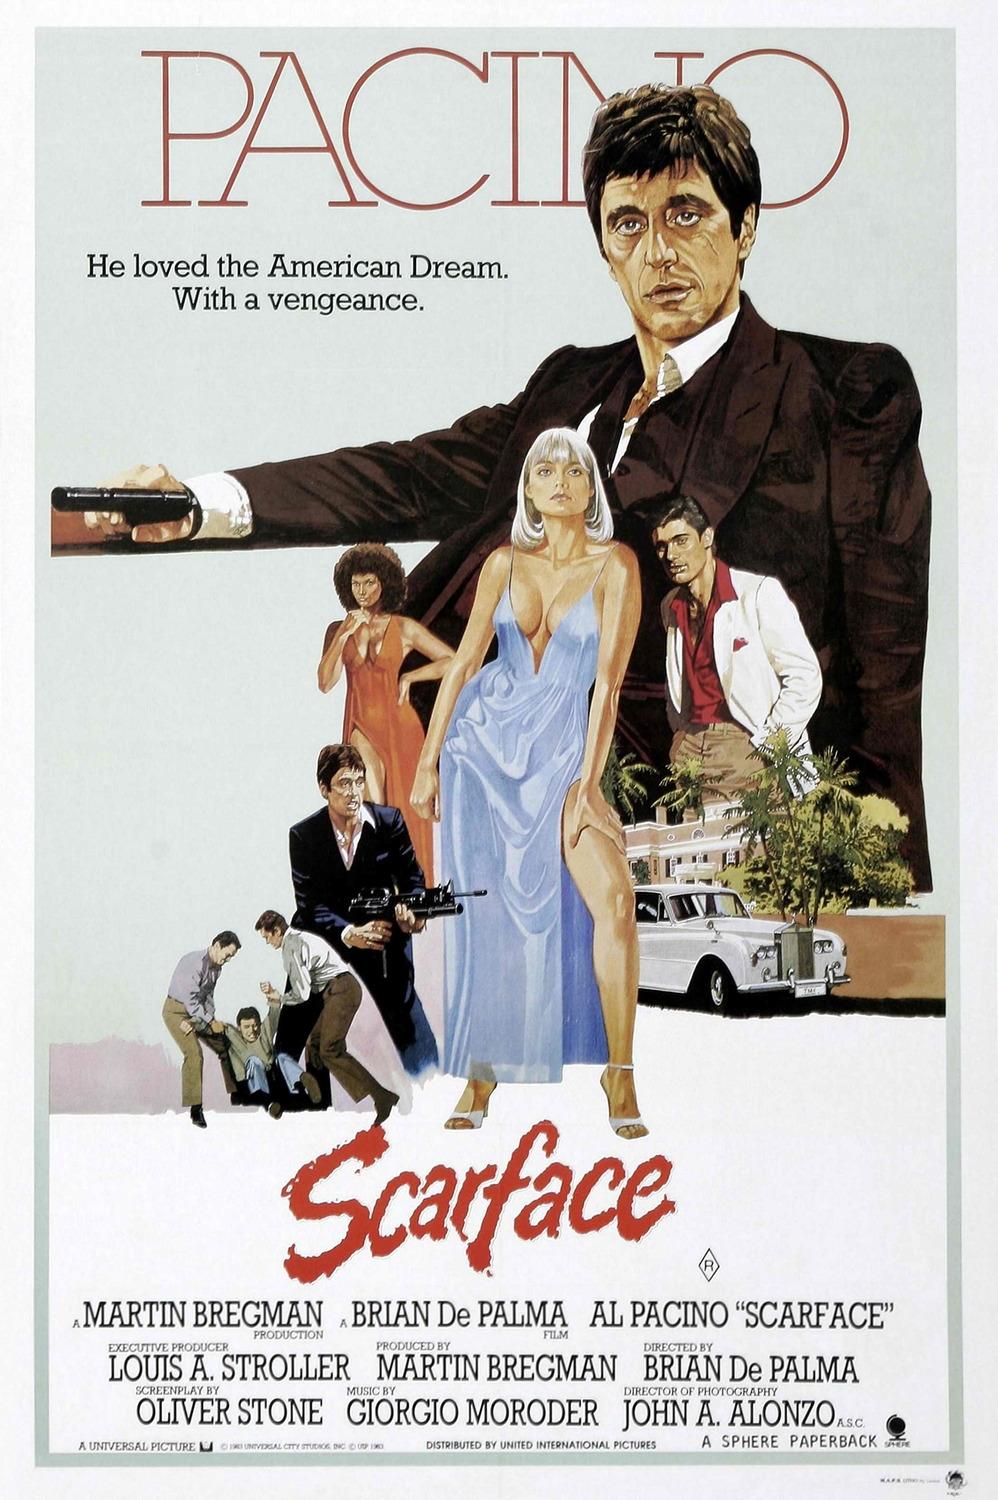 scarface cover poster